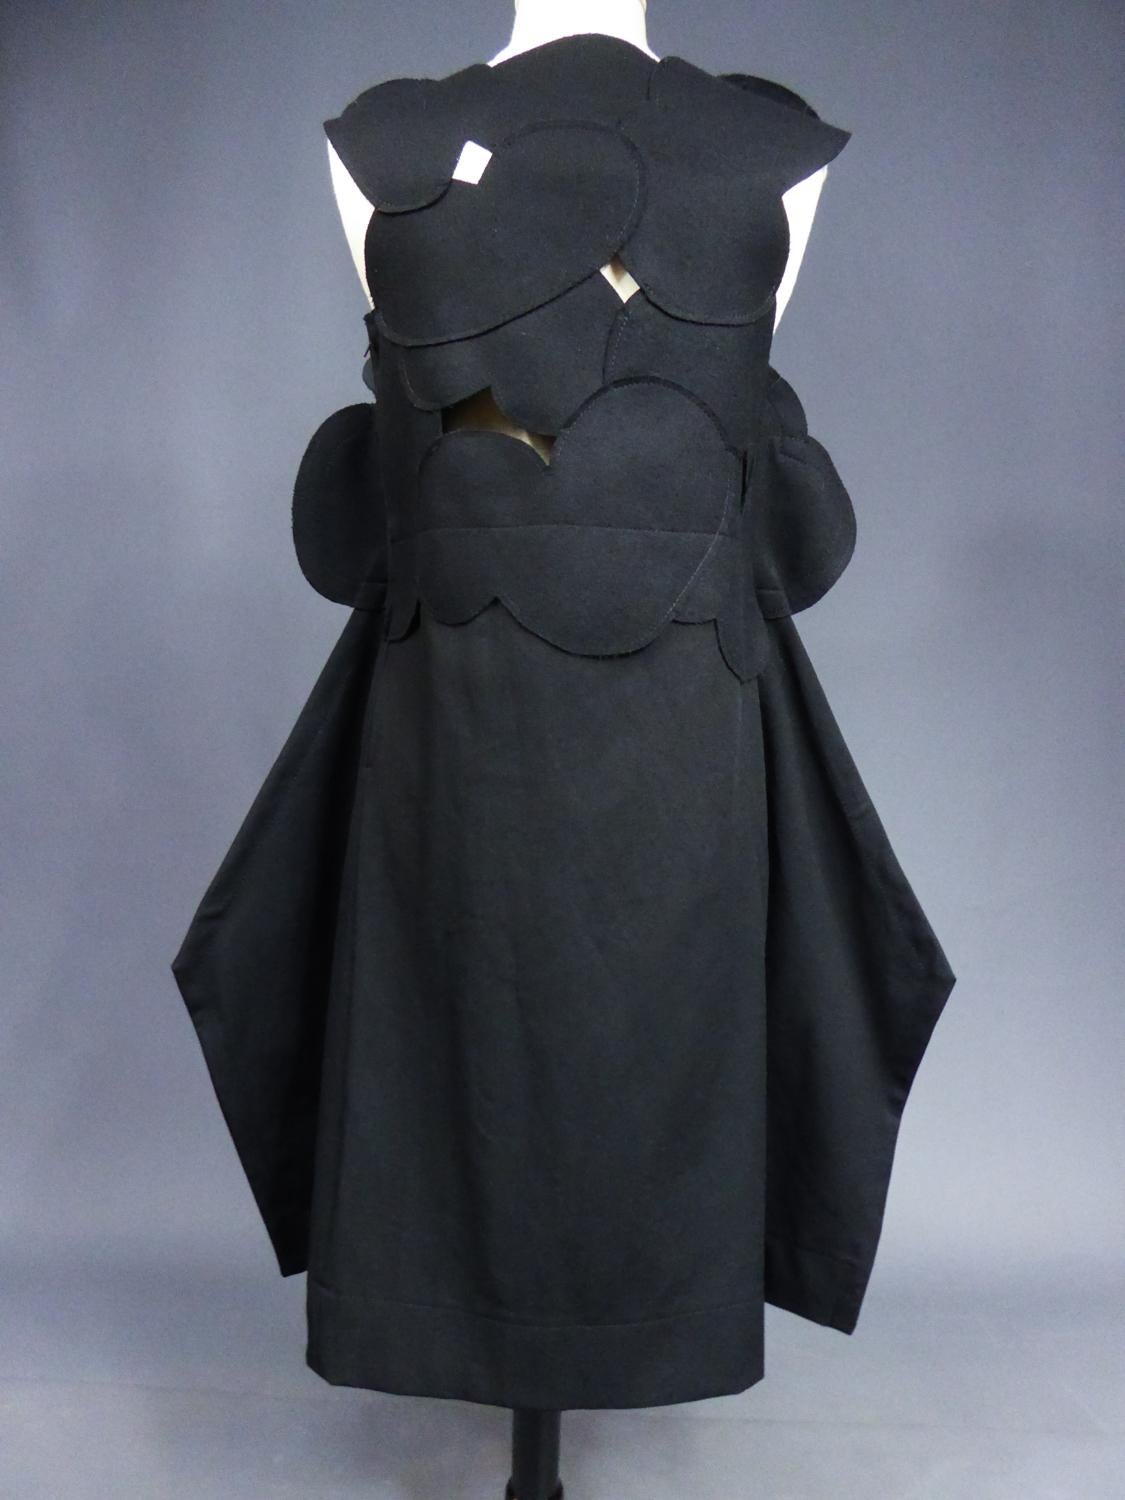 A Comme des Garcons Junya Watanabe Black Woollen Chasuble Dress Circa 2000 For Sale 6